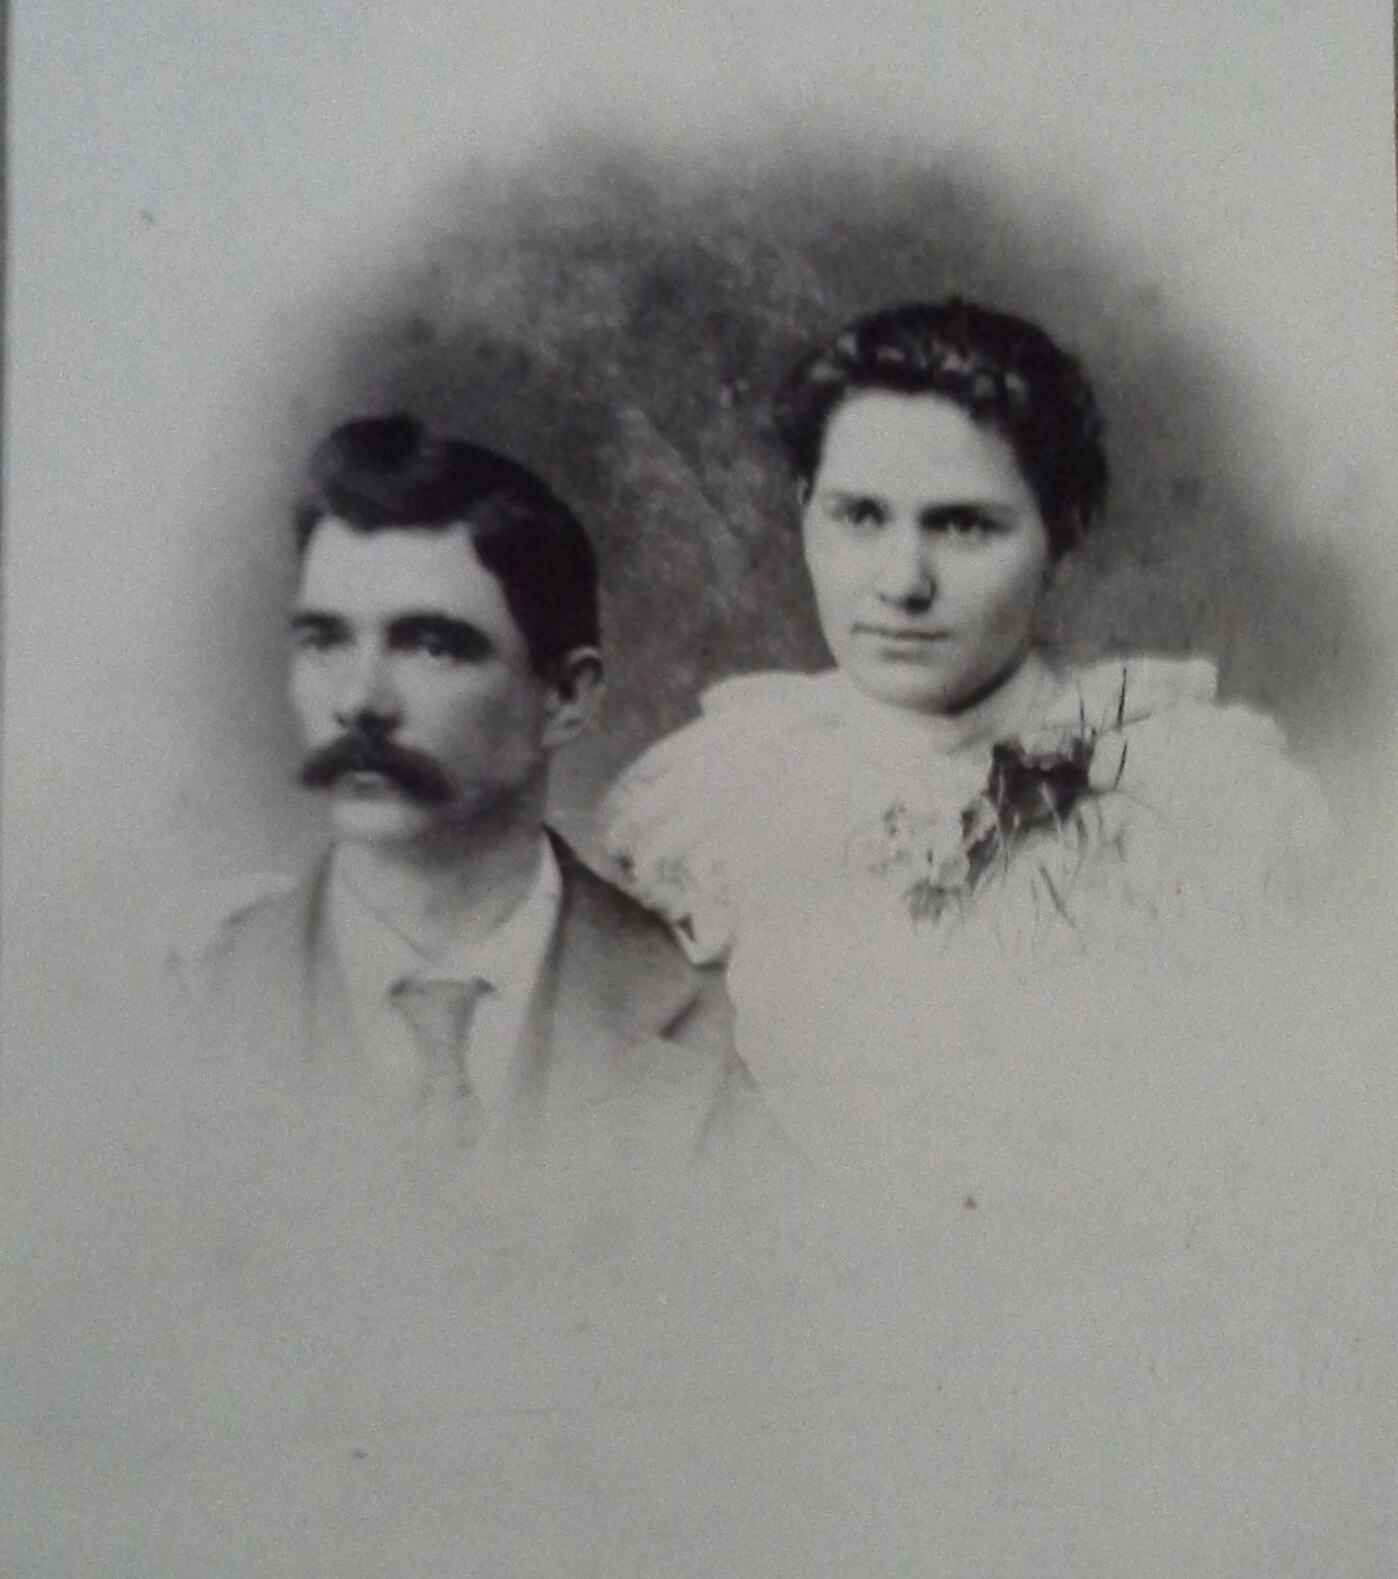 A wedding photo of Janice Lowry's grandparents from 1895. Photo courtesy of Janice Lowry